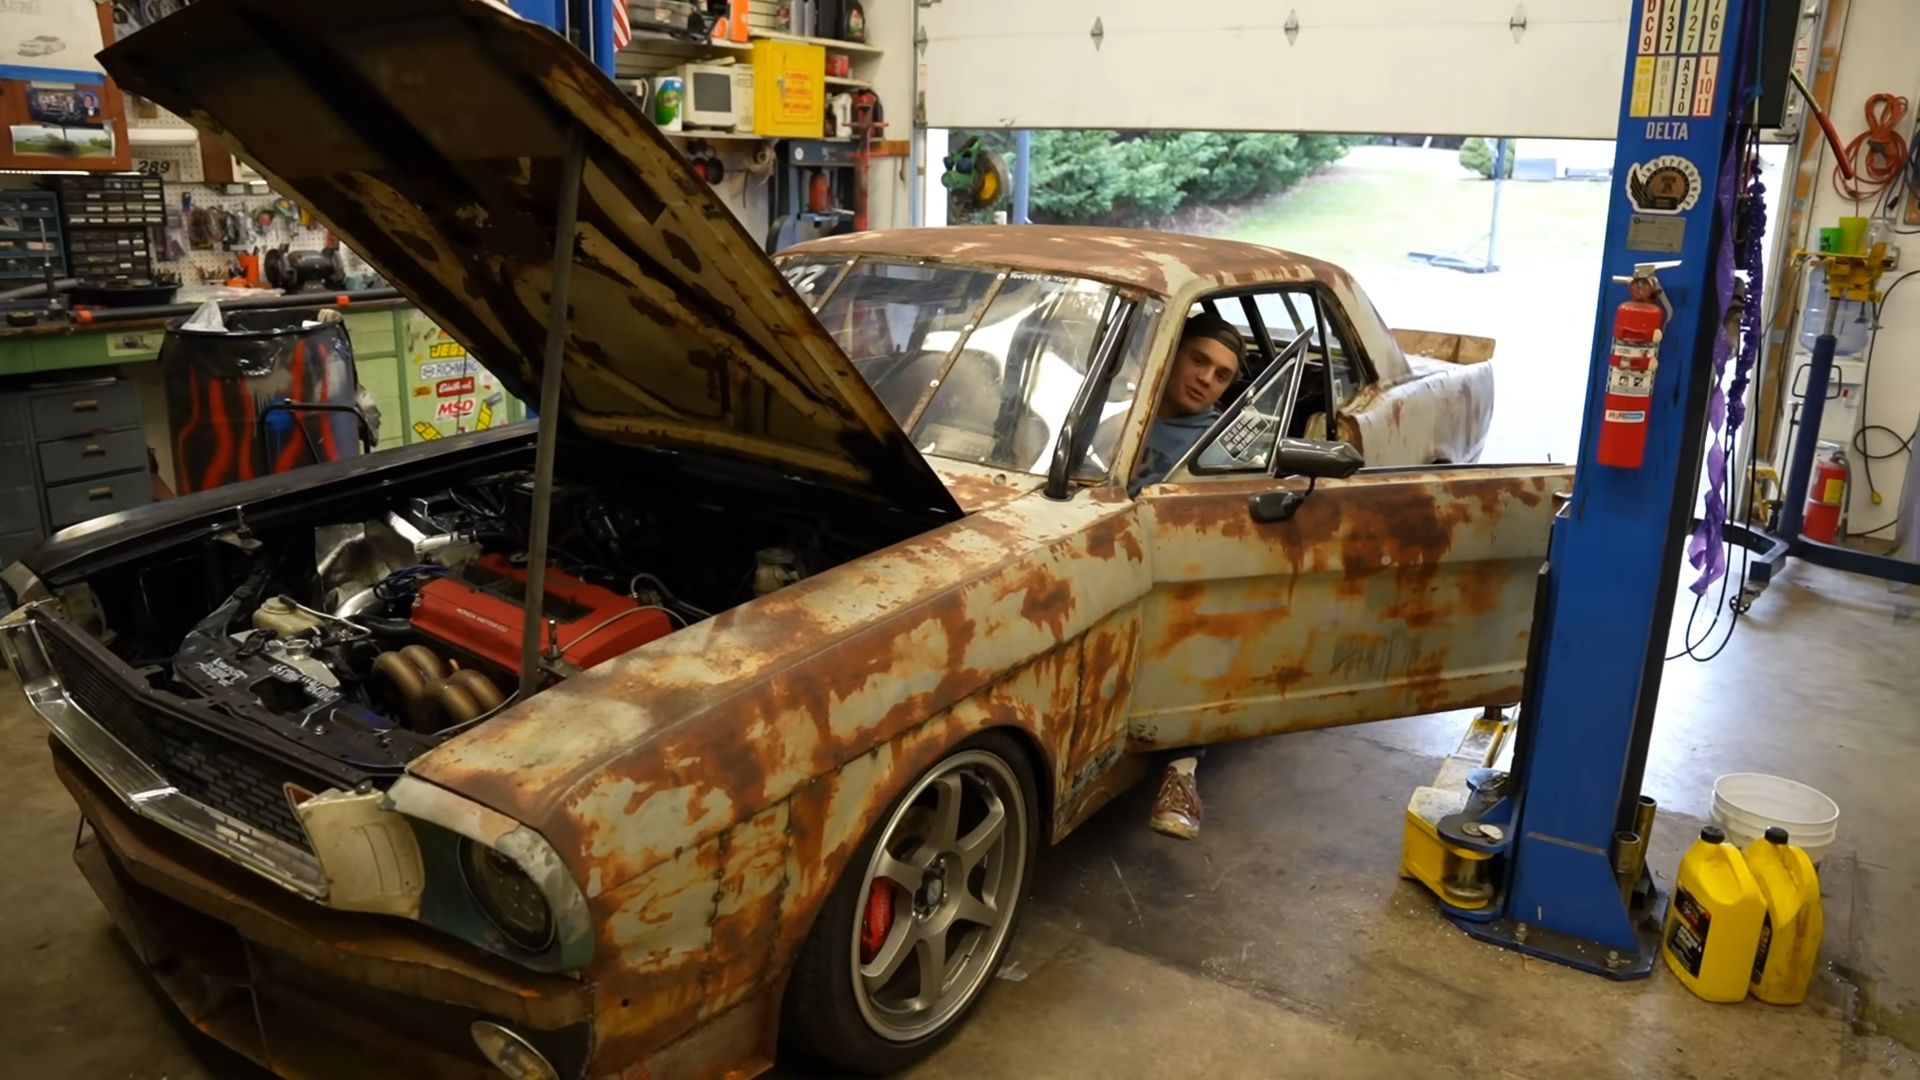 Honda-Swapped 1965 Ford Mustang Firing Up With New Transmission